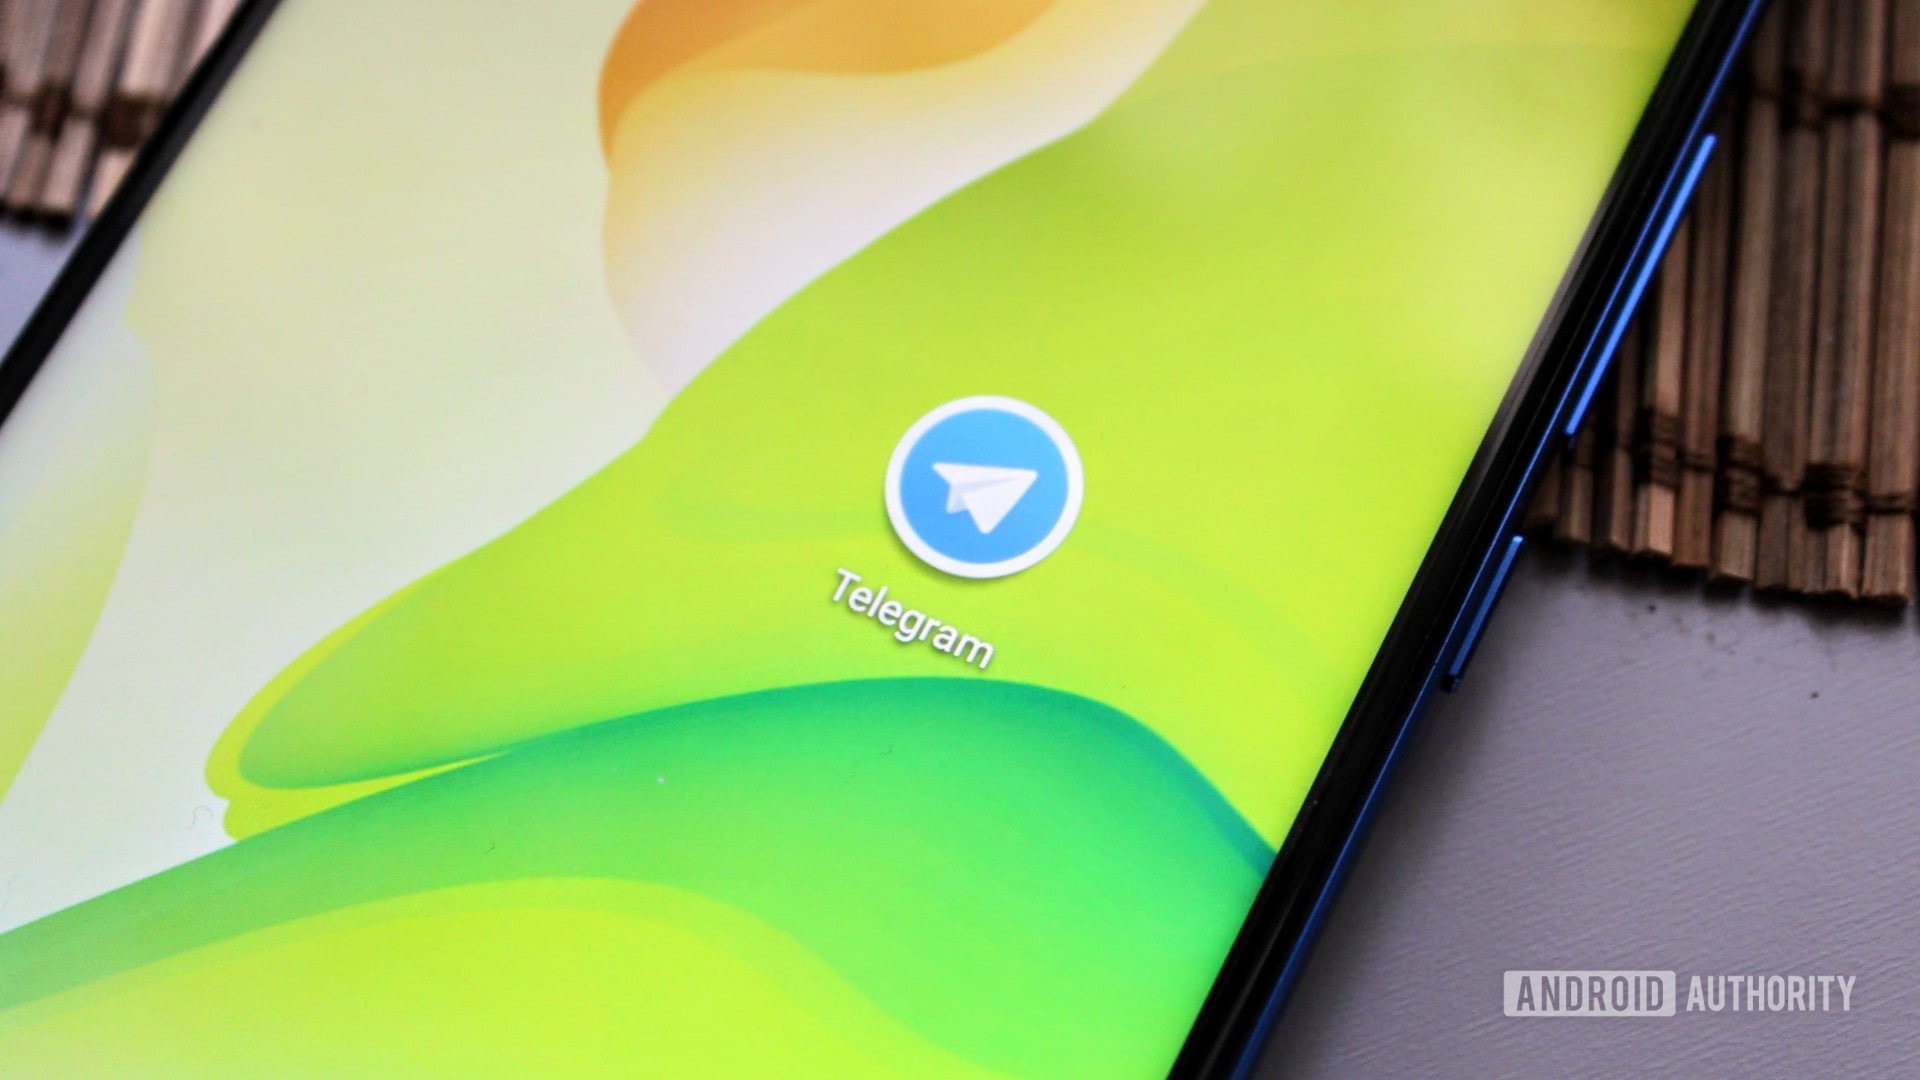 The Telegram icon on the Honor View 20 on a green background.